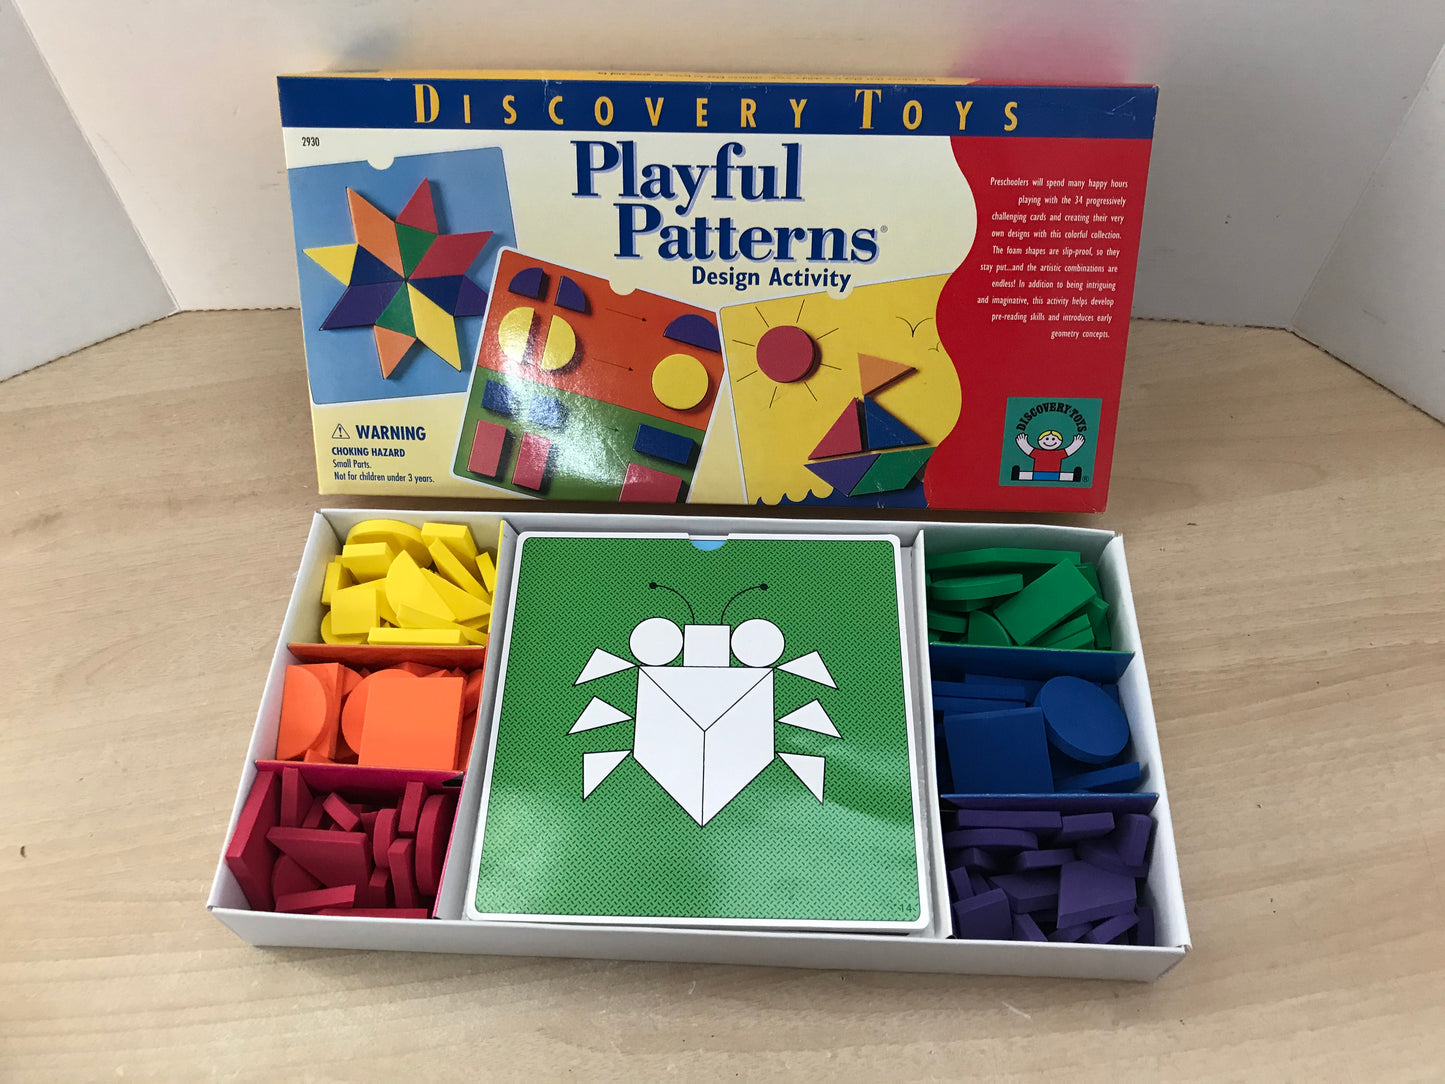 Discovery Toys Playful Patterns Complete Excellent